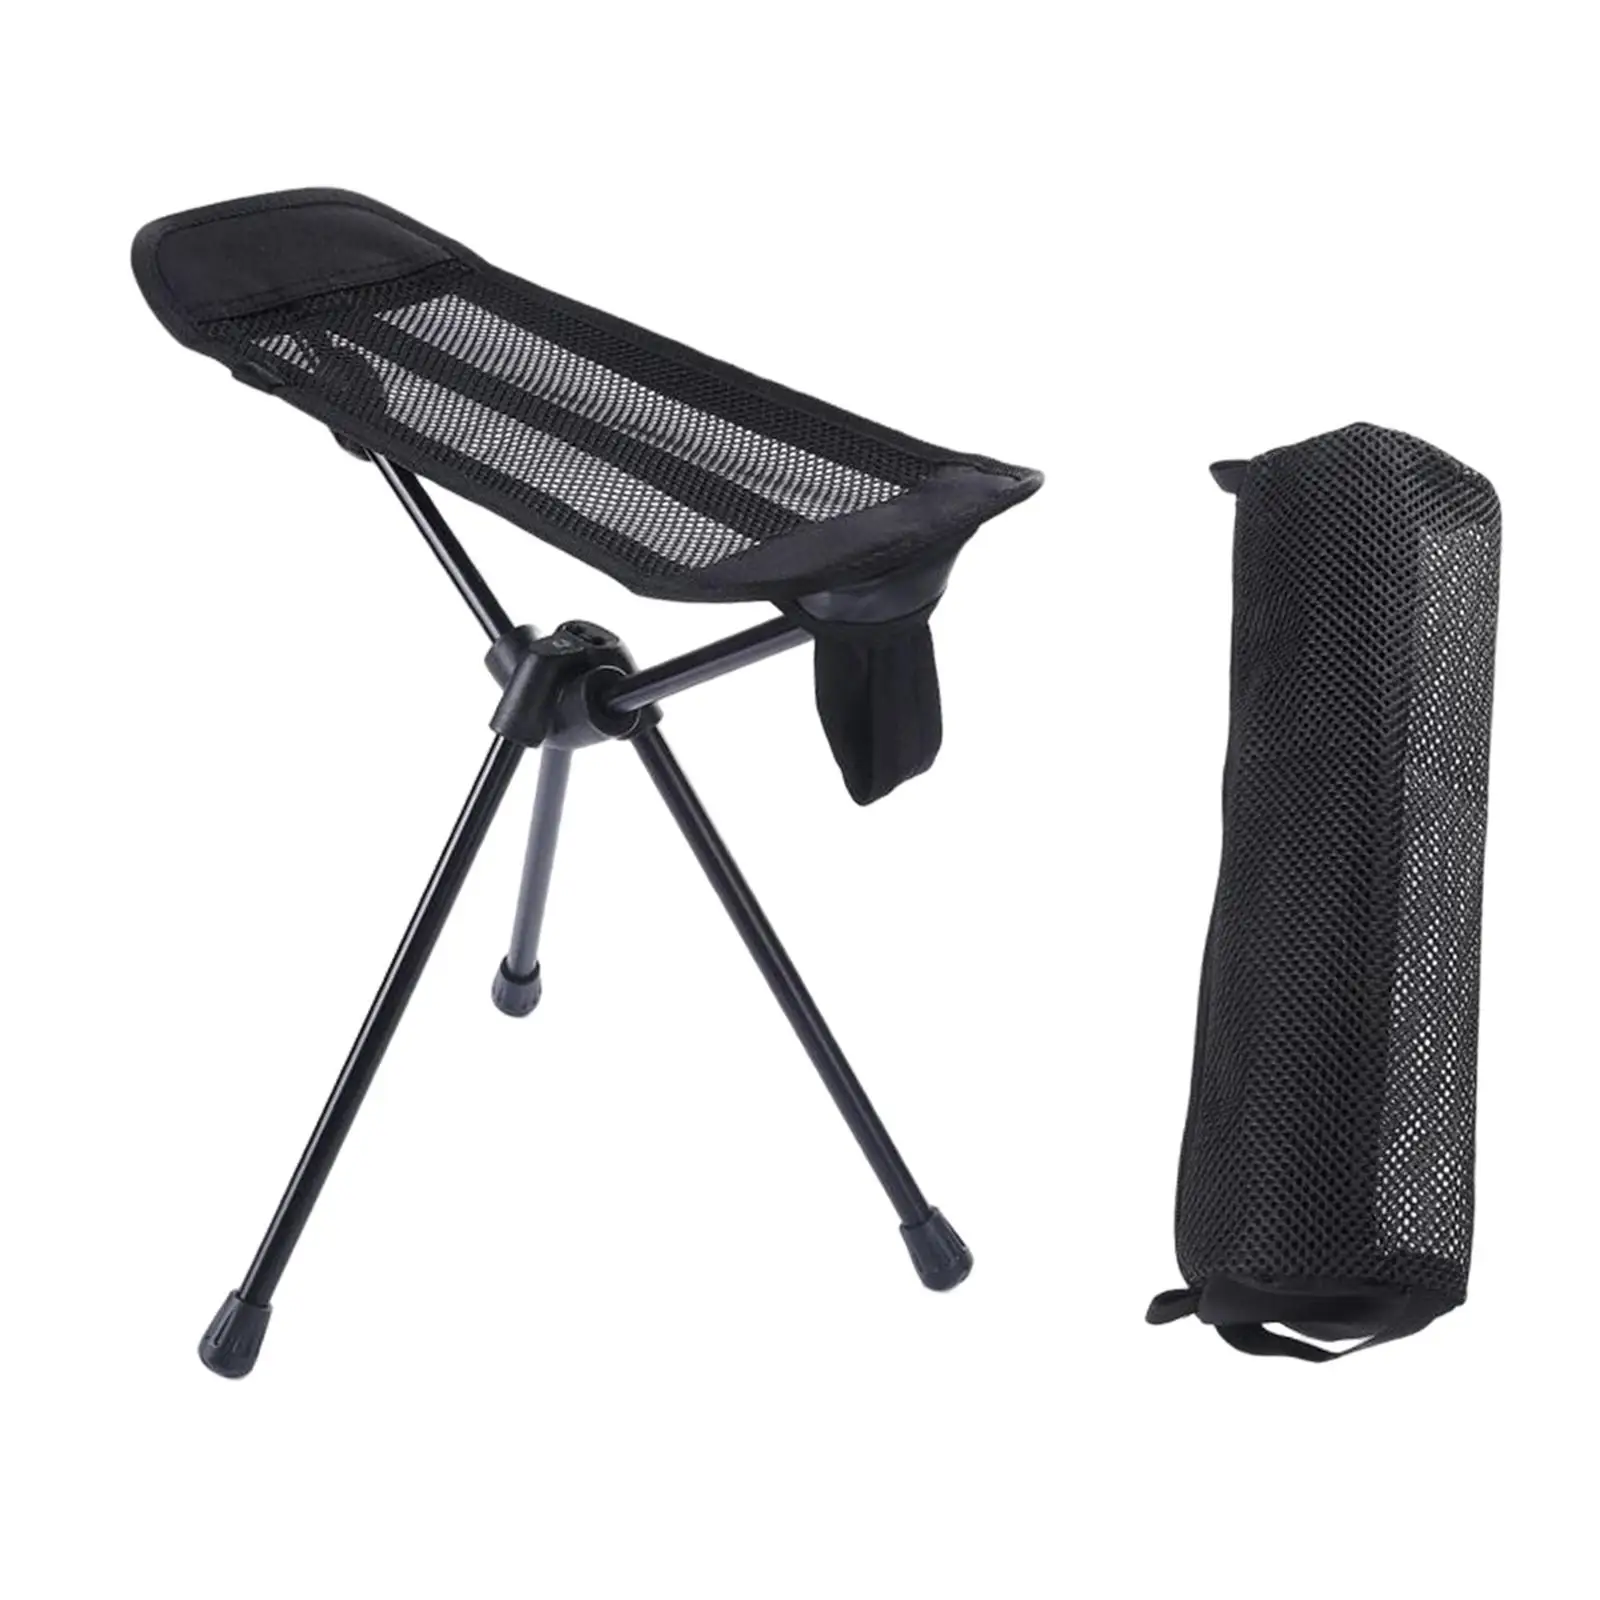 Portable Stool Adjustable Feet Legs Rest with Storage Bag Ultralight Collapsible